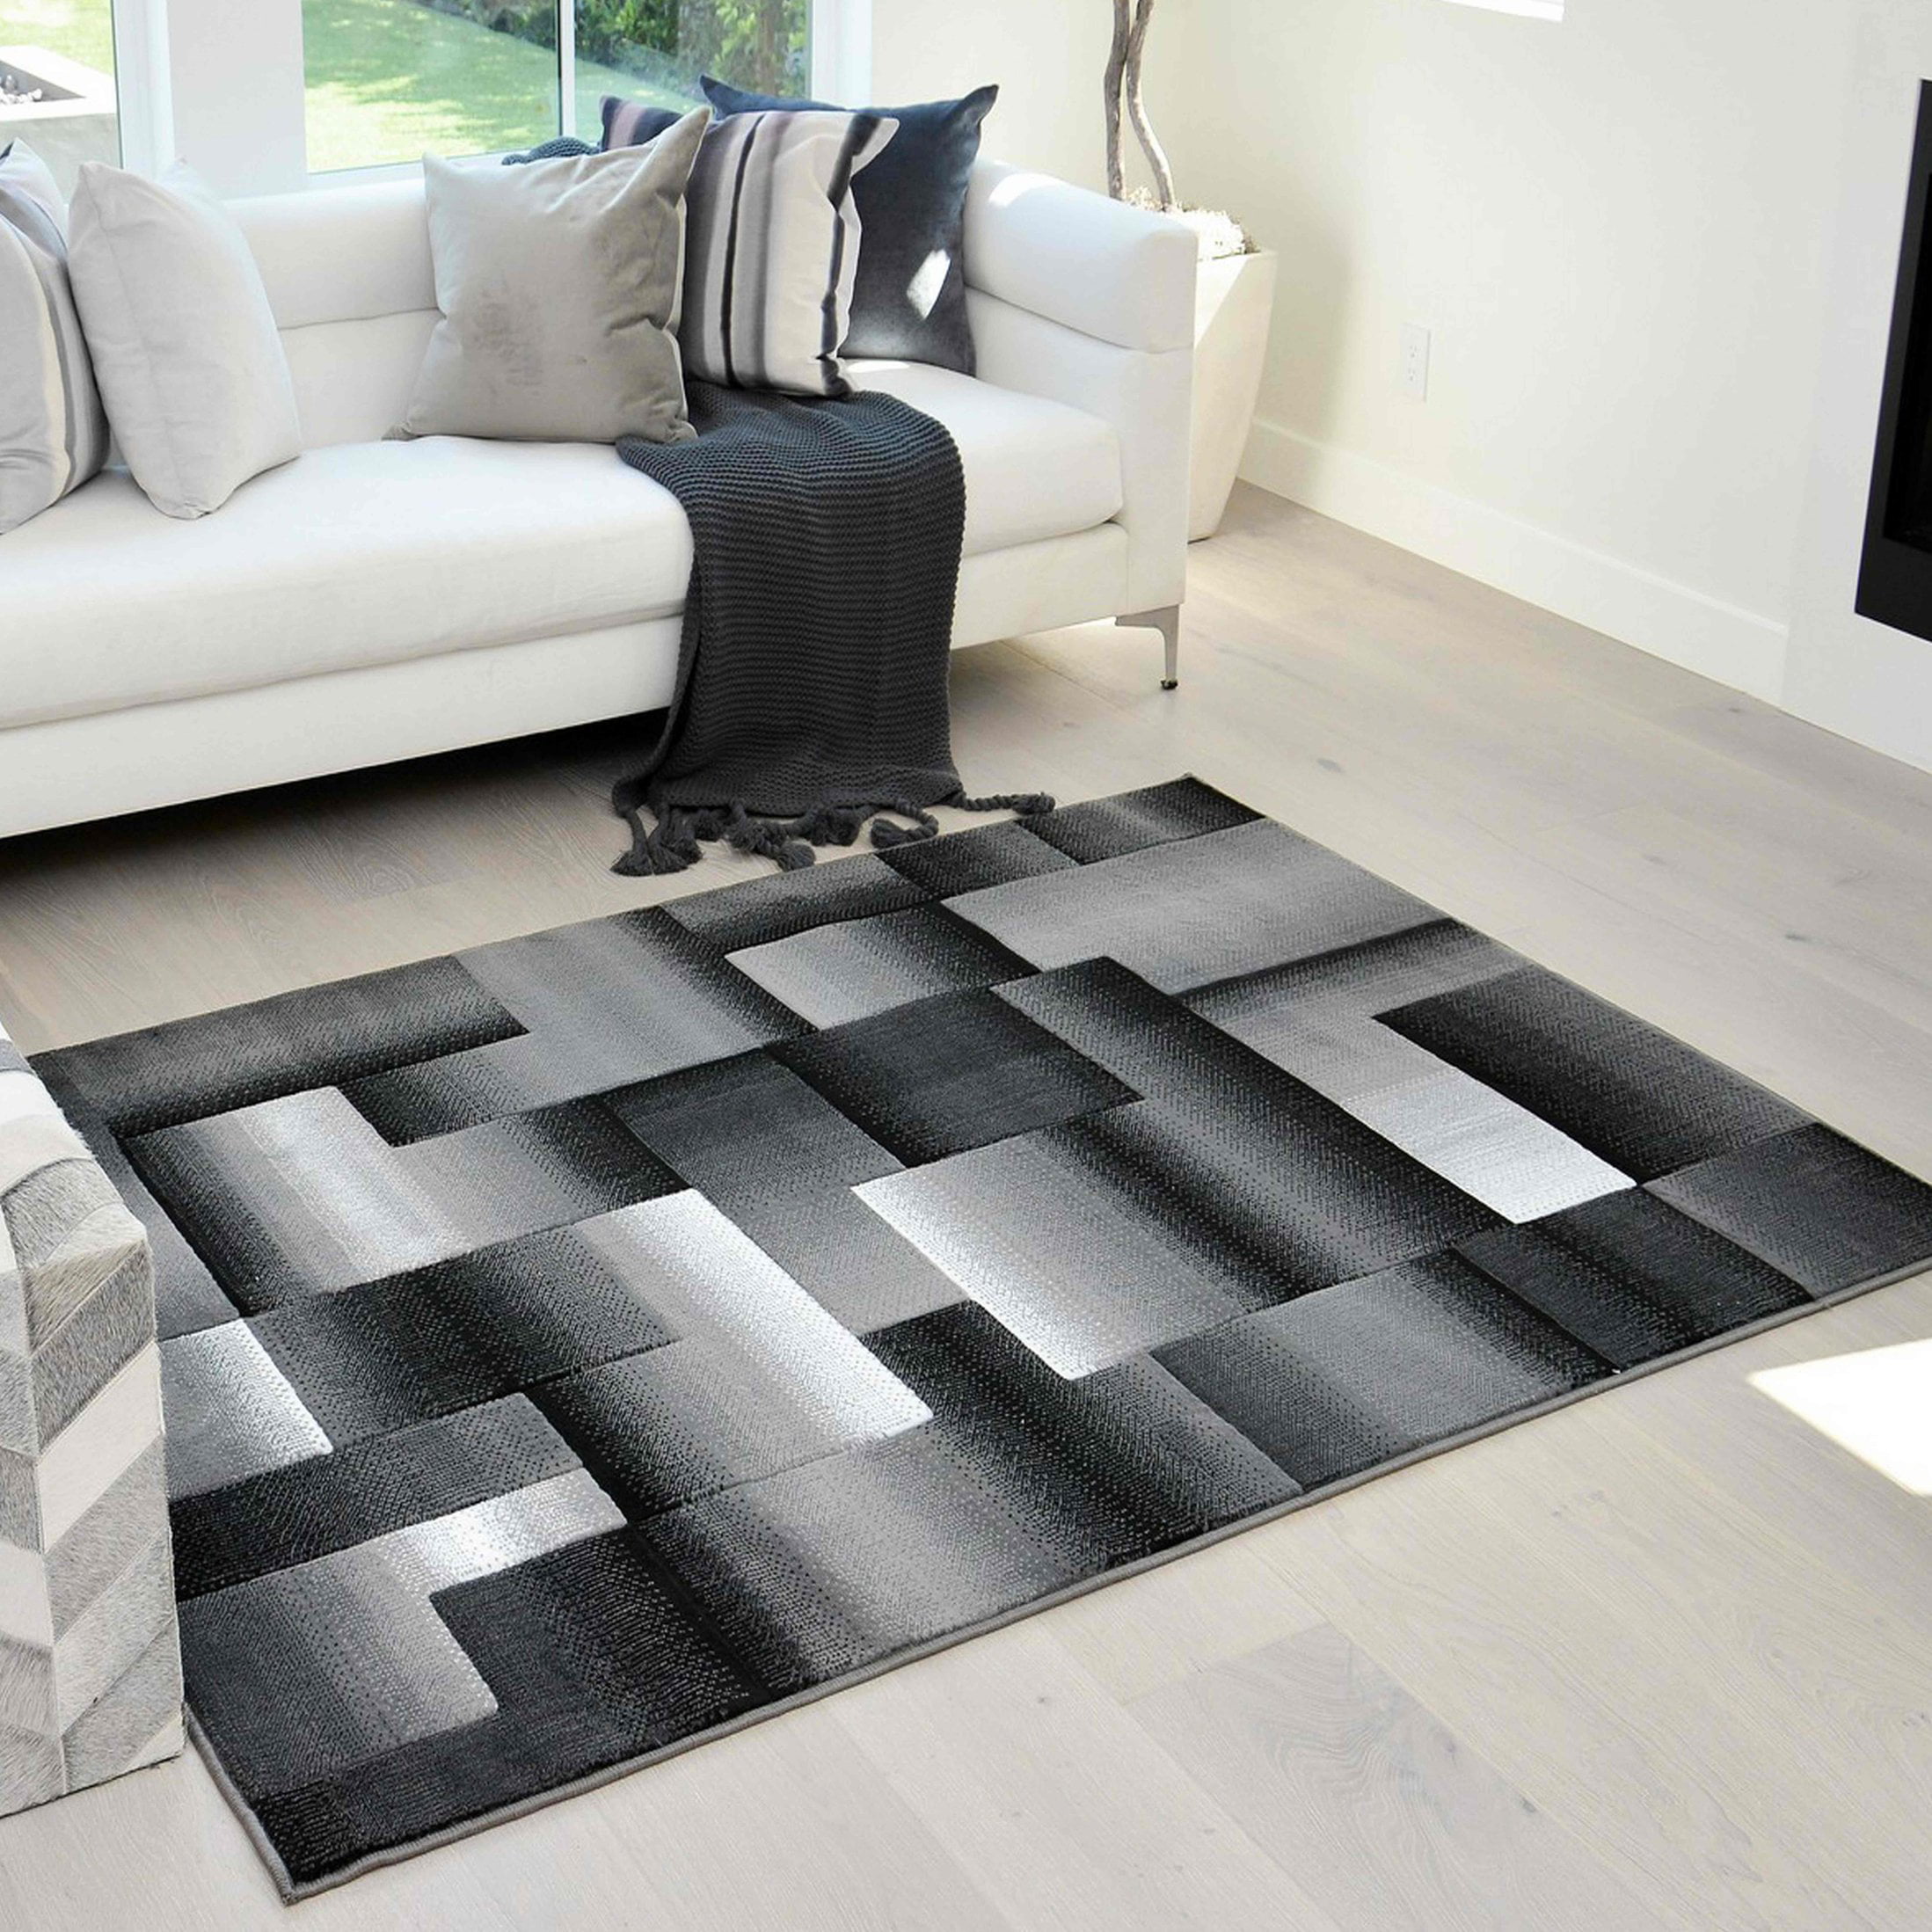 Rugs 8x10 Area Rug Abstract Modern Contemporary Geometric Design 5x7 Rug Carpet 